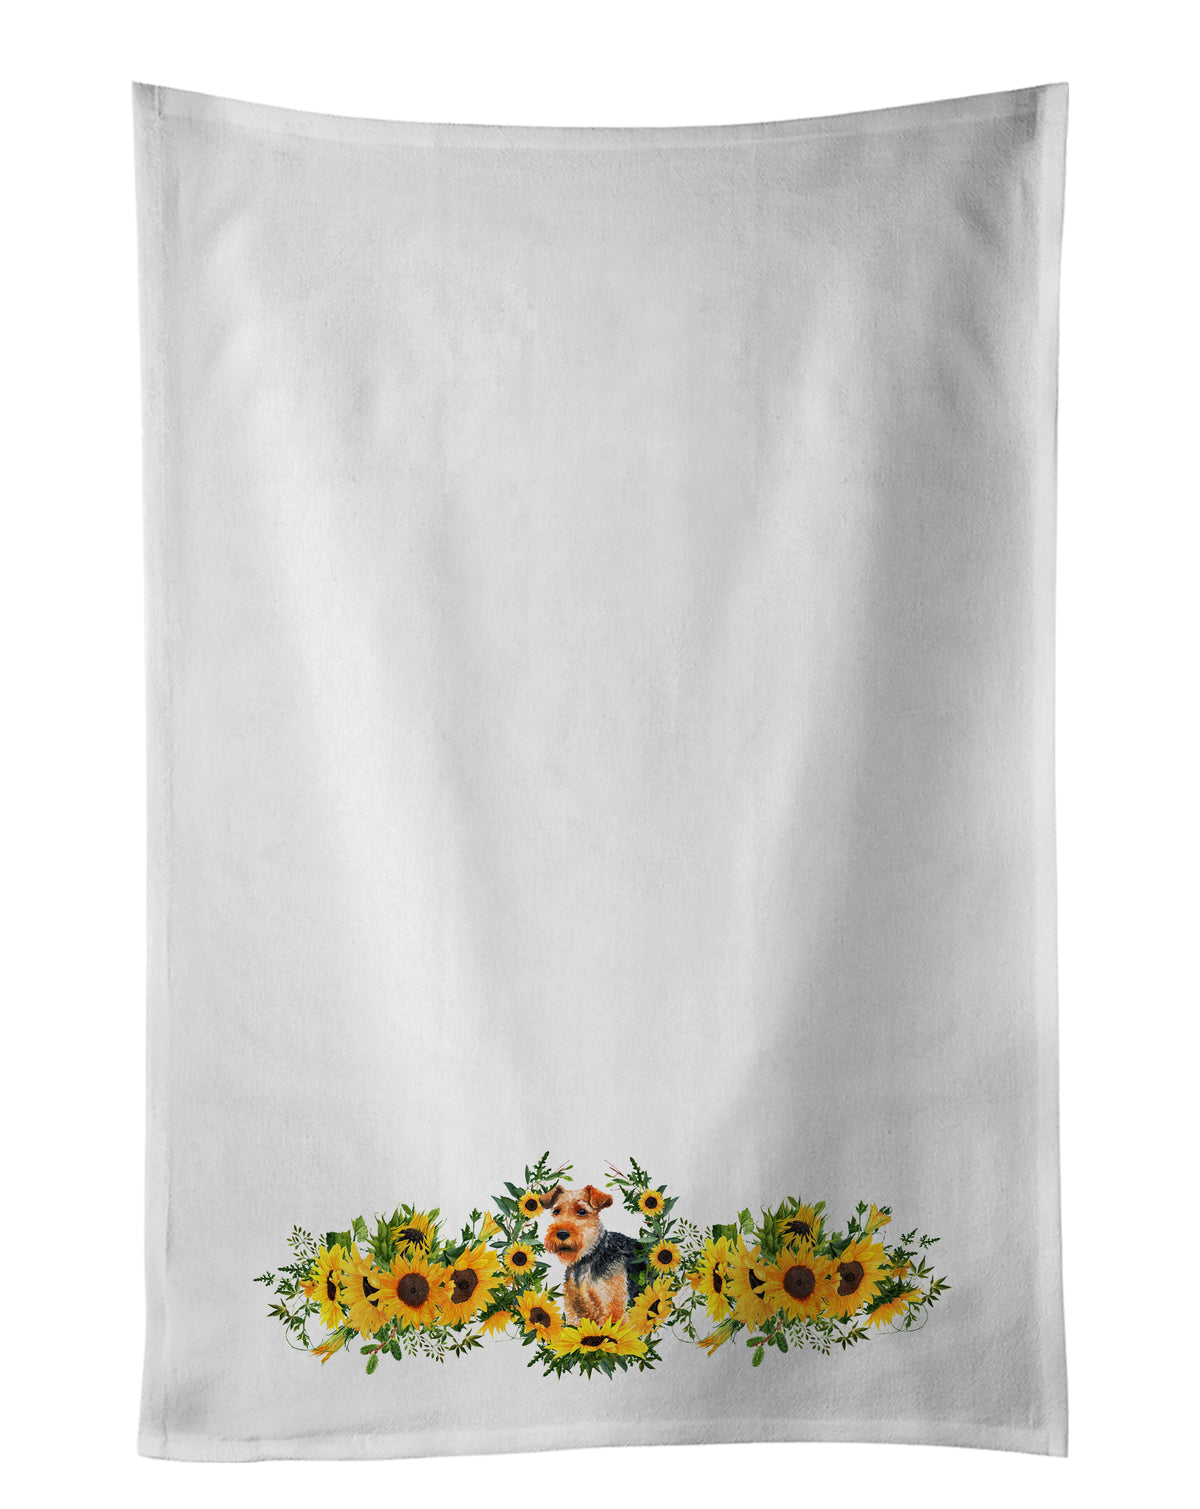 Buy this Welsh Terrier in Sunflowers White Kitchen Towel Set of 2